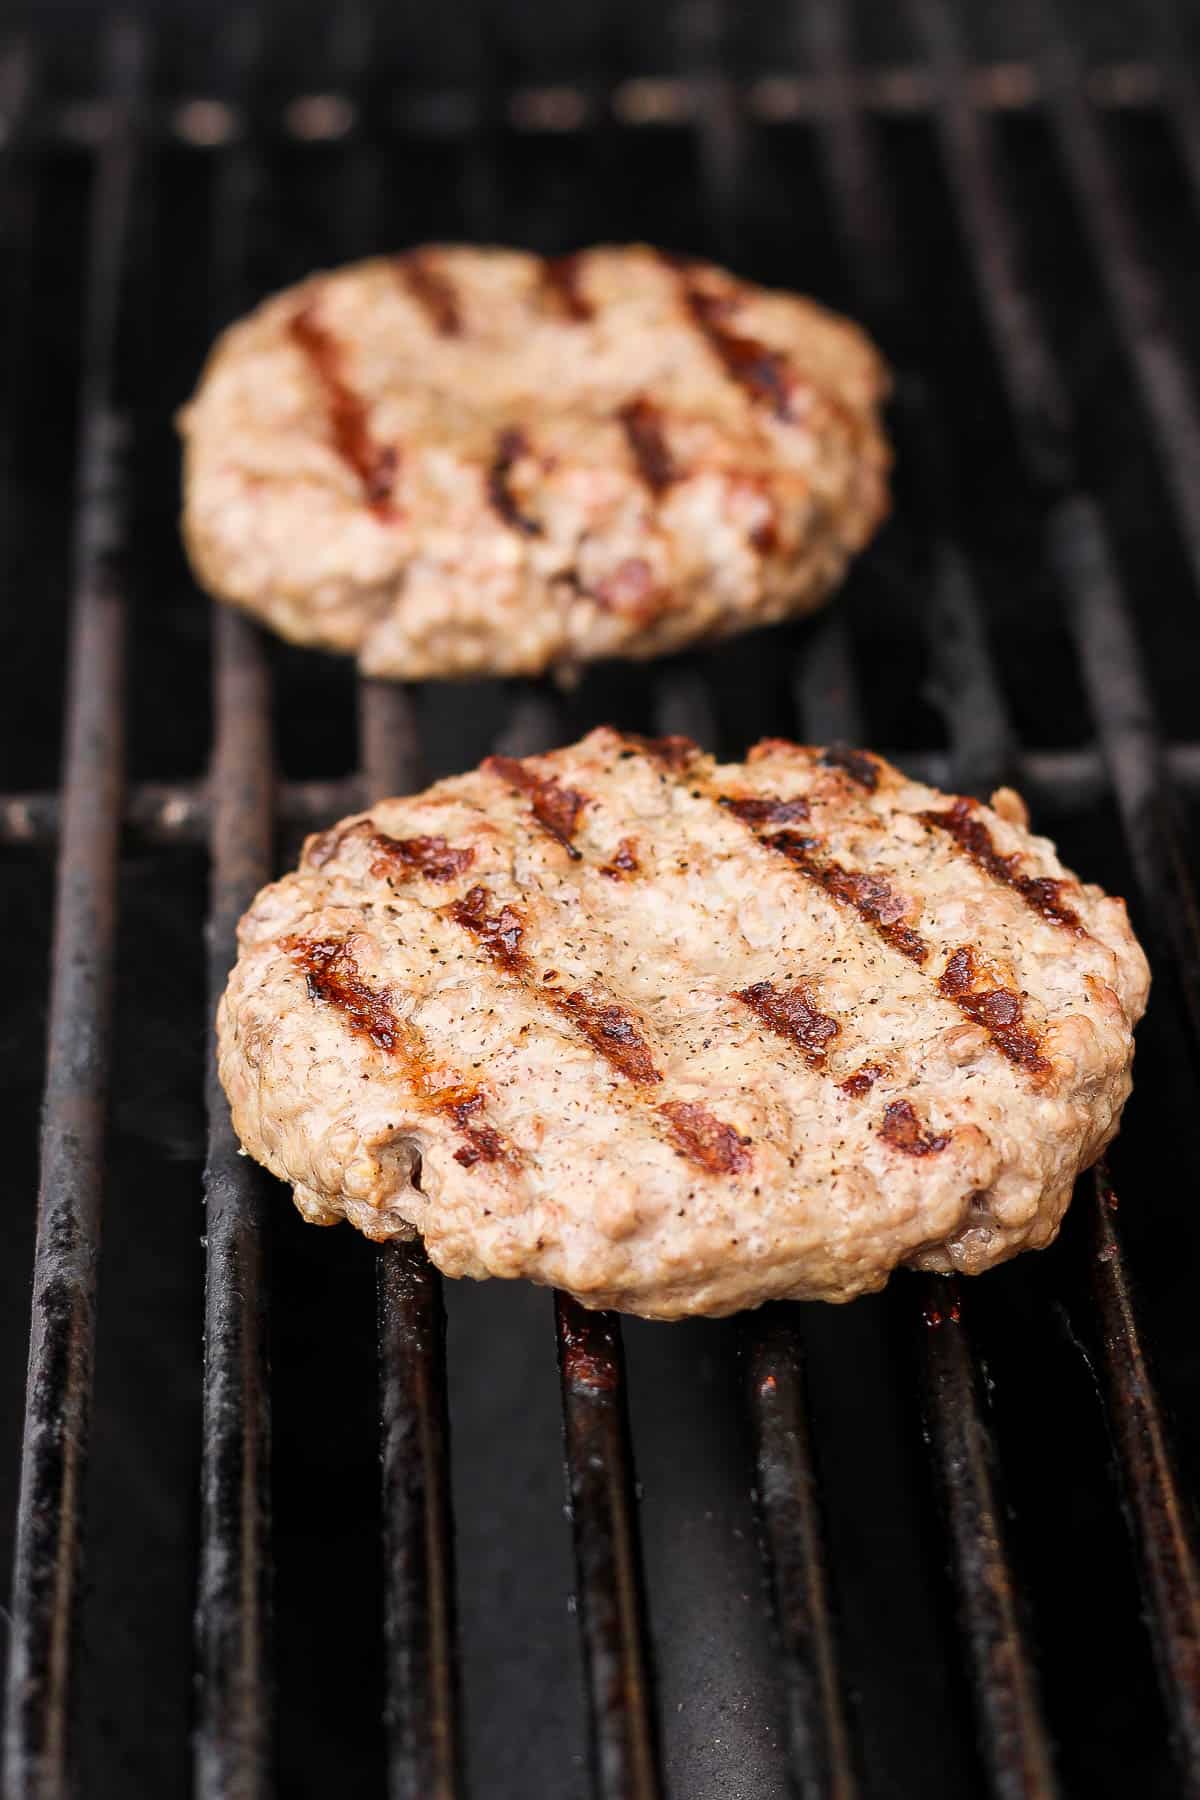 Pork burgers on the grill.